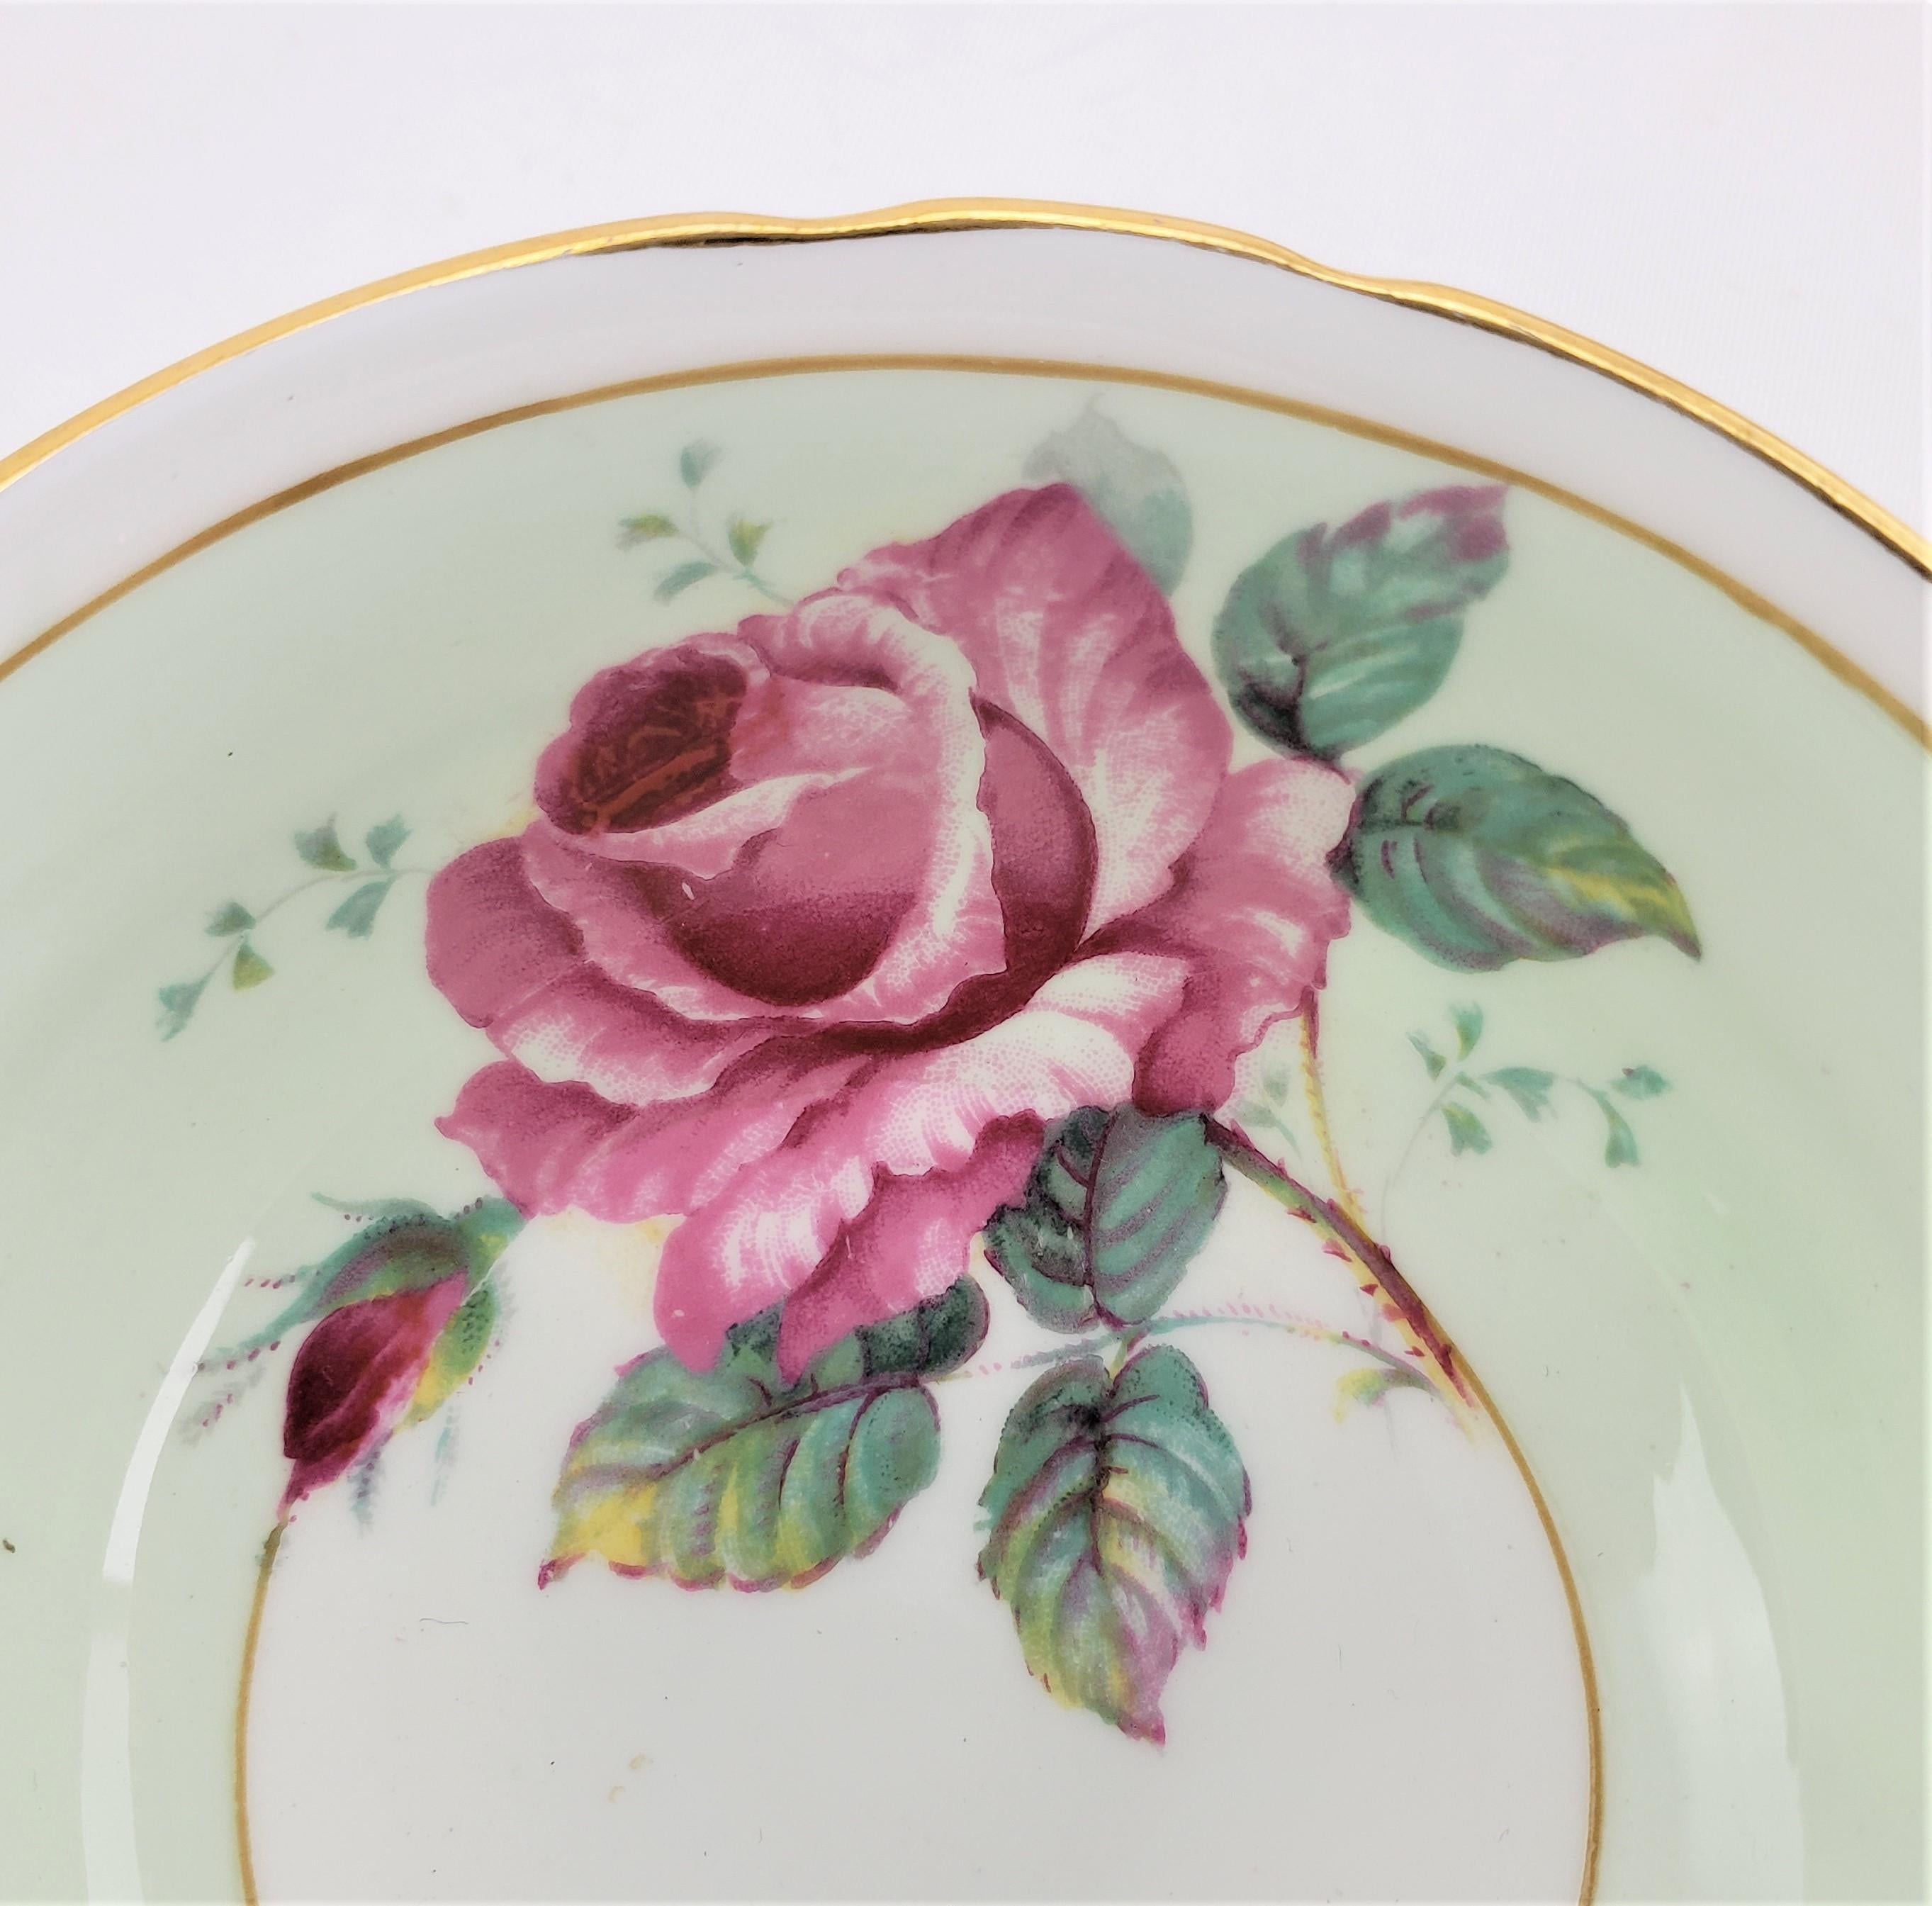 Porcelain Vintage Paragon Double Warrant Bone China Teacup & Saucer with Red Cabbage Rose For Sale